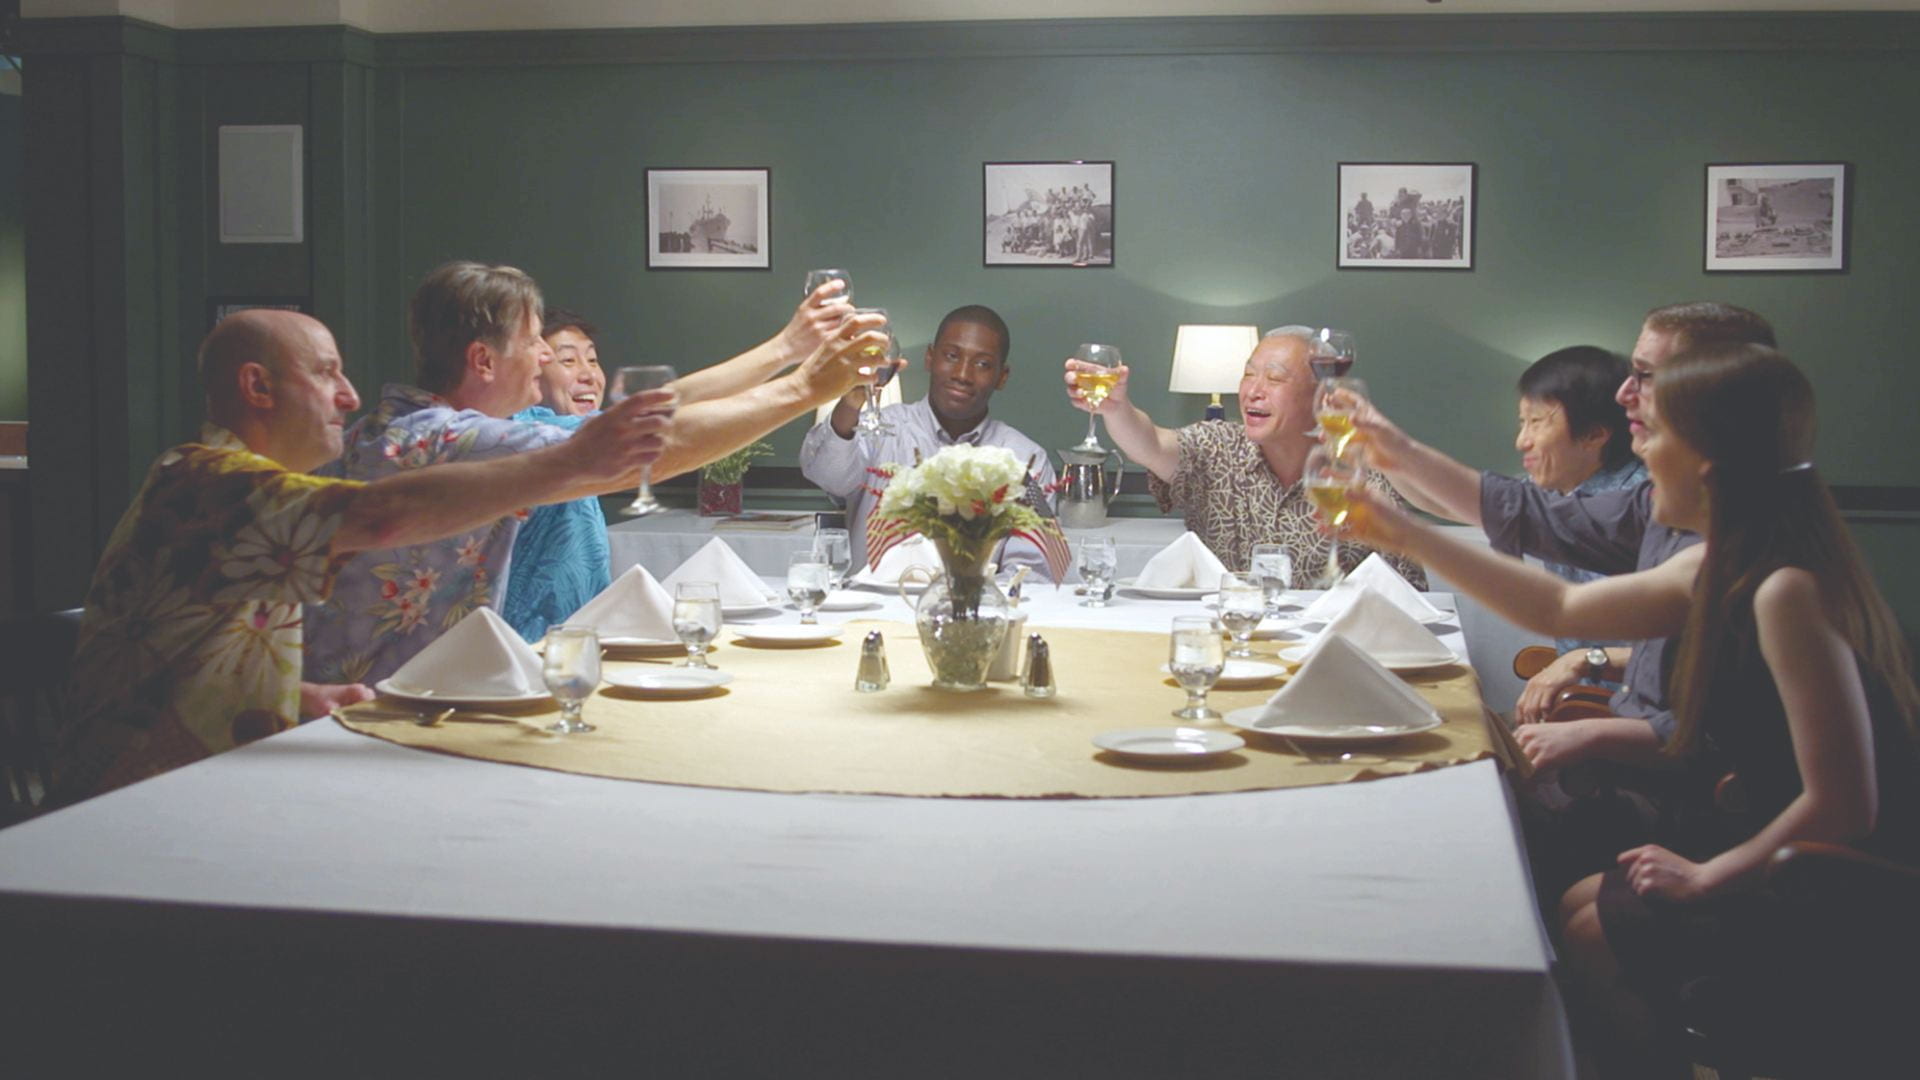 A group of friends at raising their glasses at a dinner table